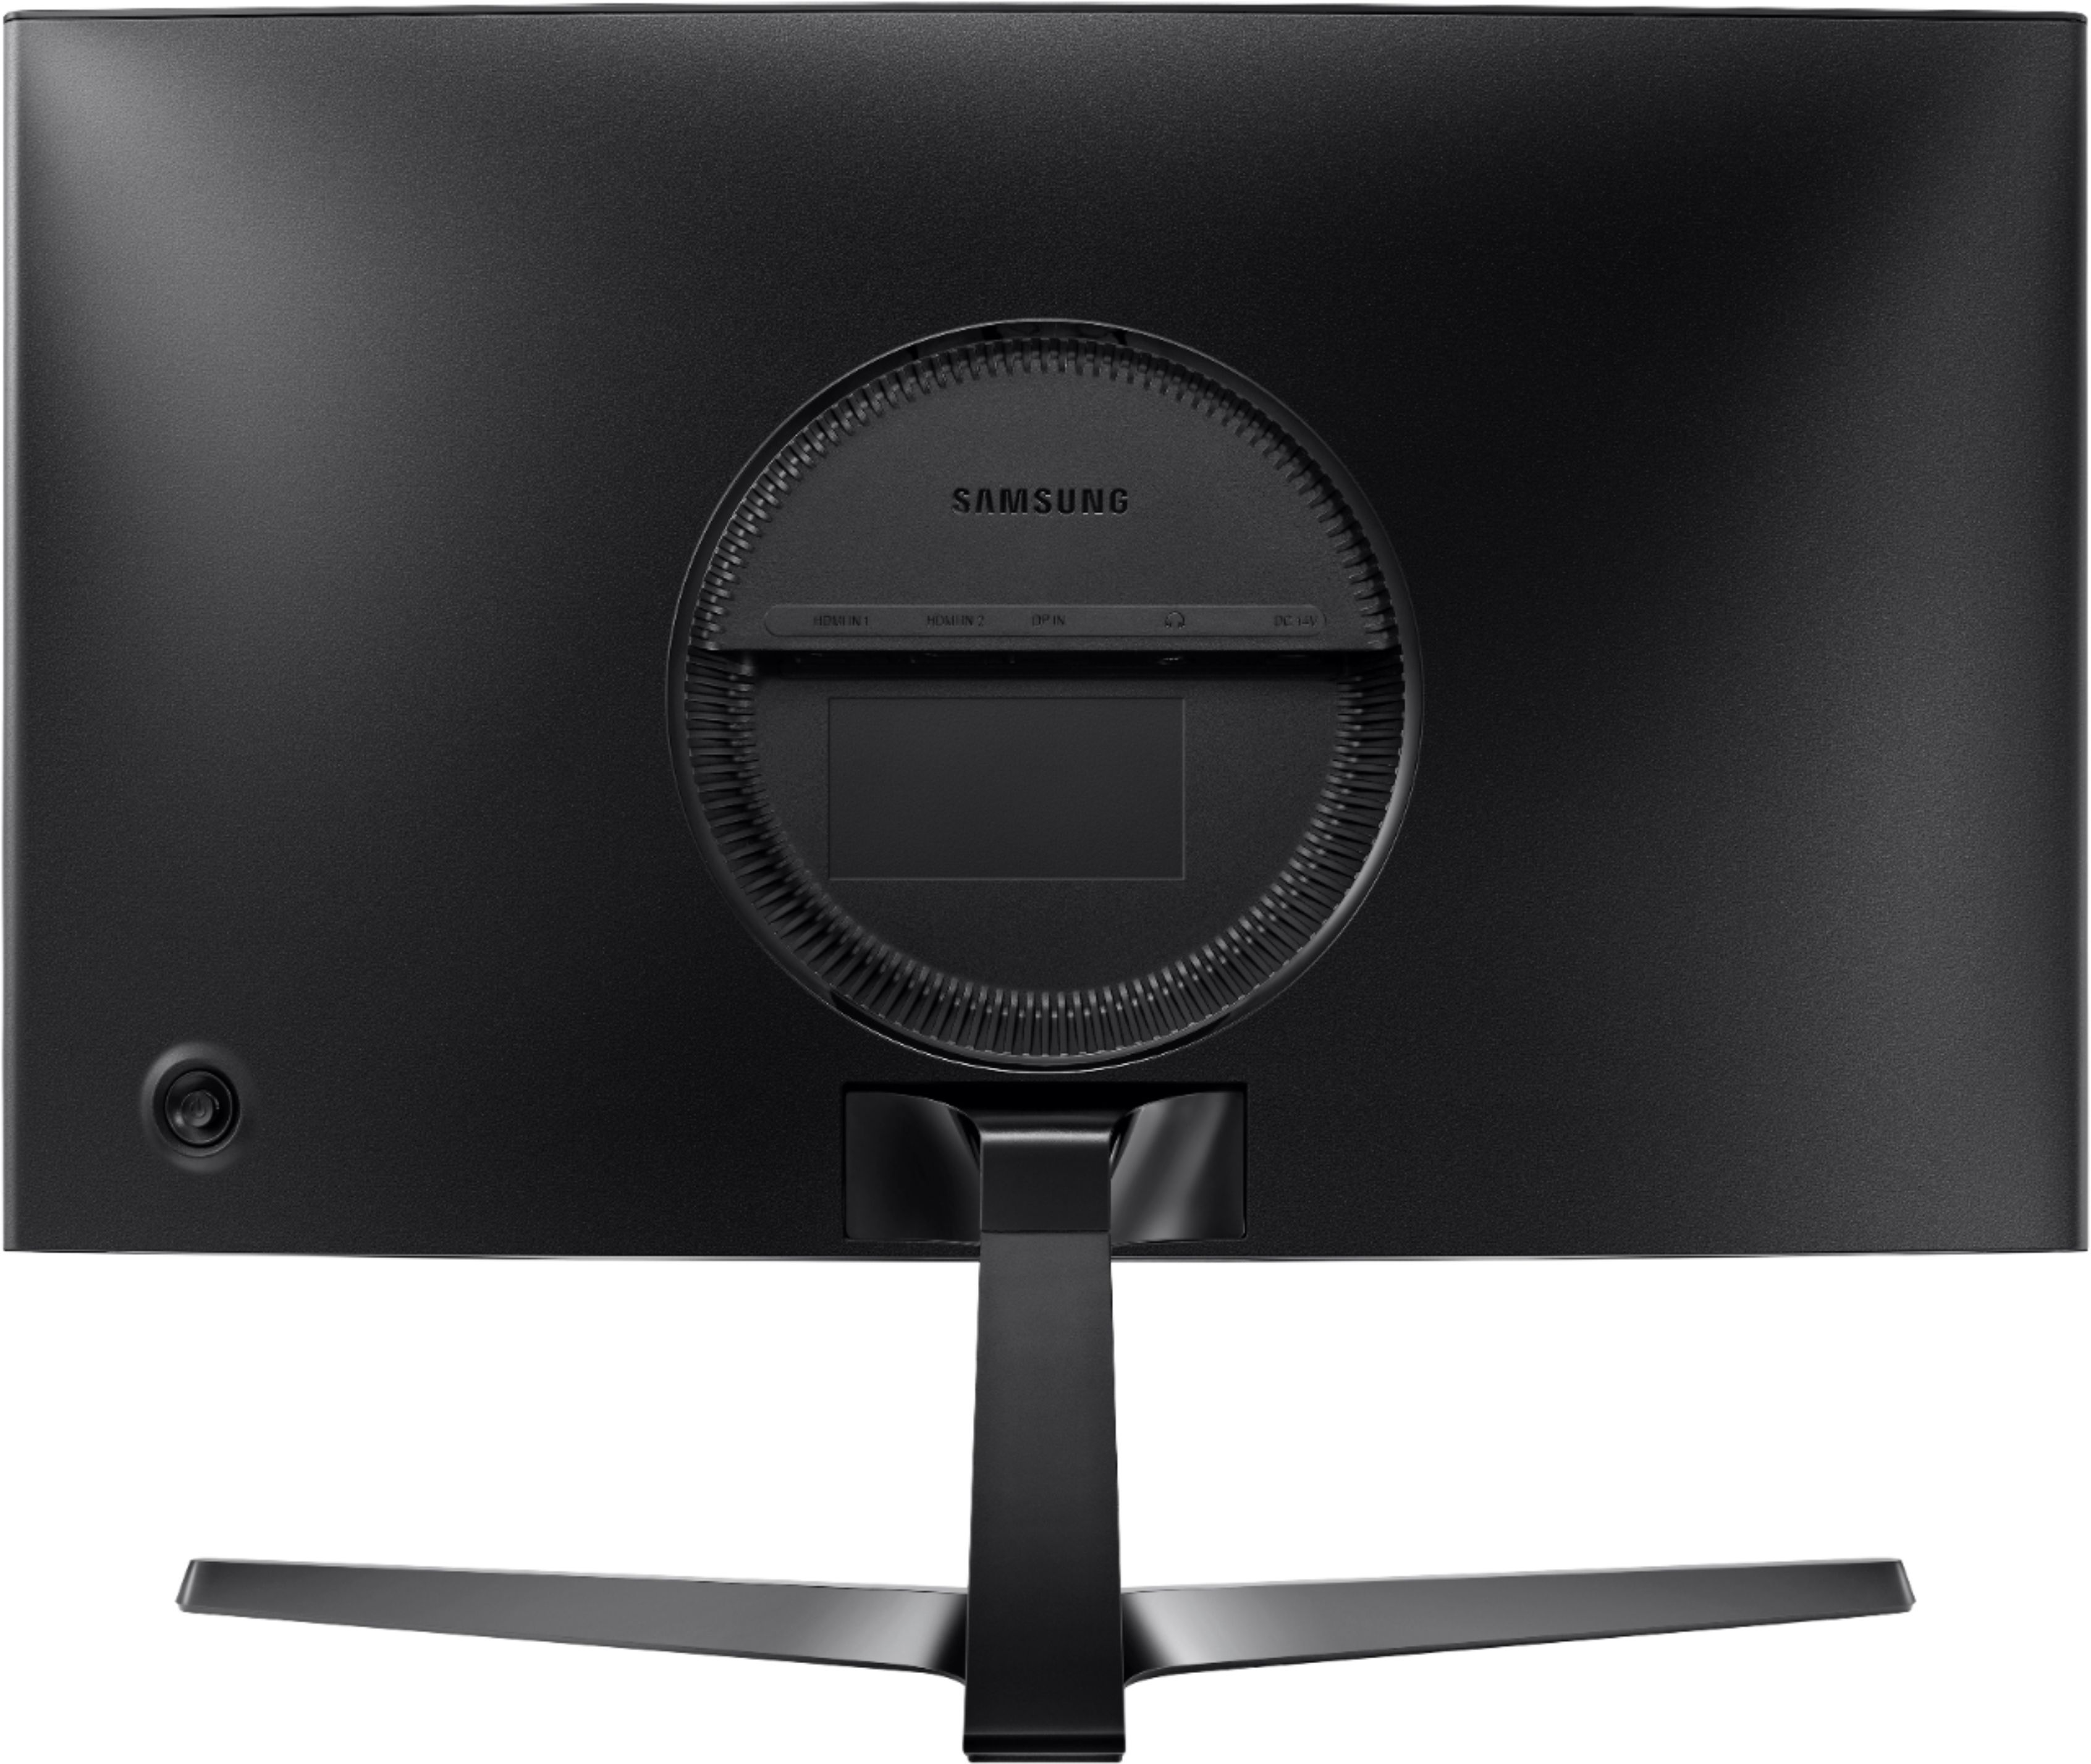 Back View: Samsung - Geek Squad Certified Refurbished 24" LED Curved FHD FreeSync Monitor - Black